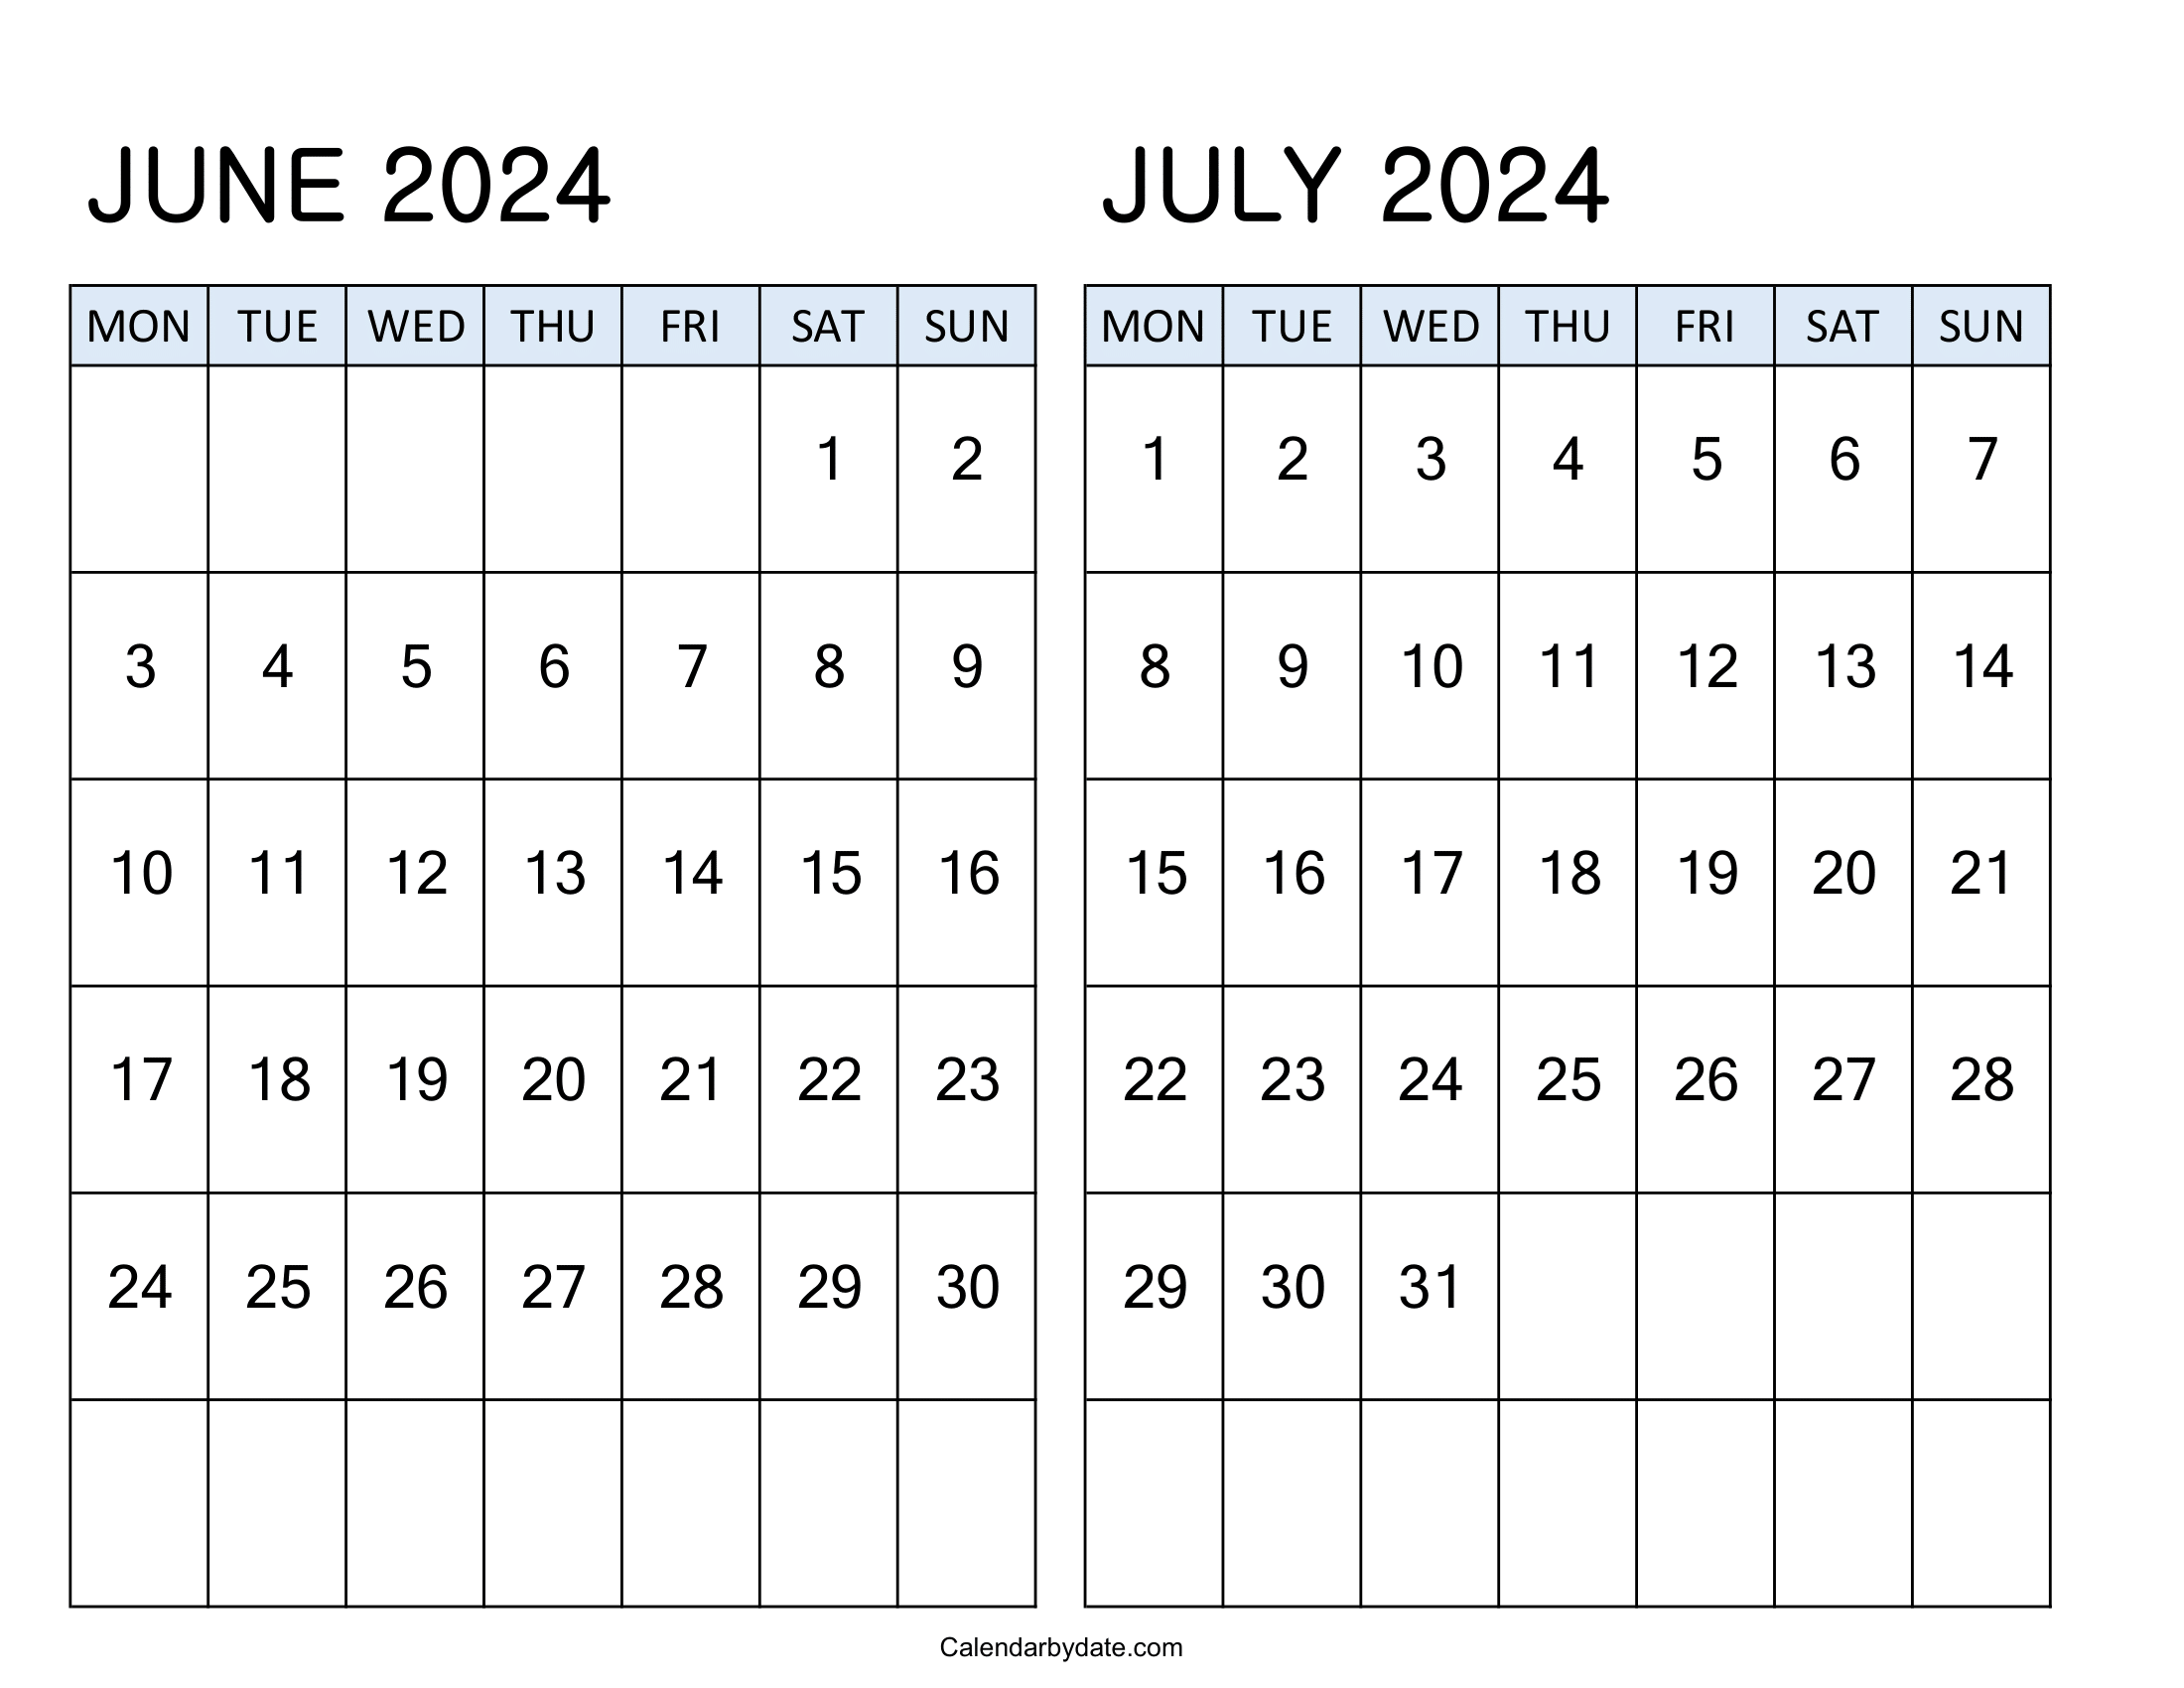 June July 2024 Calendar Monday Start June July 2024 Calendar Monday Start Template is Designed in Landscape Layout with Bold Monthly Dates. These Two Month Printable Planners are Black and White.